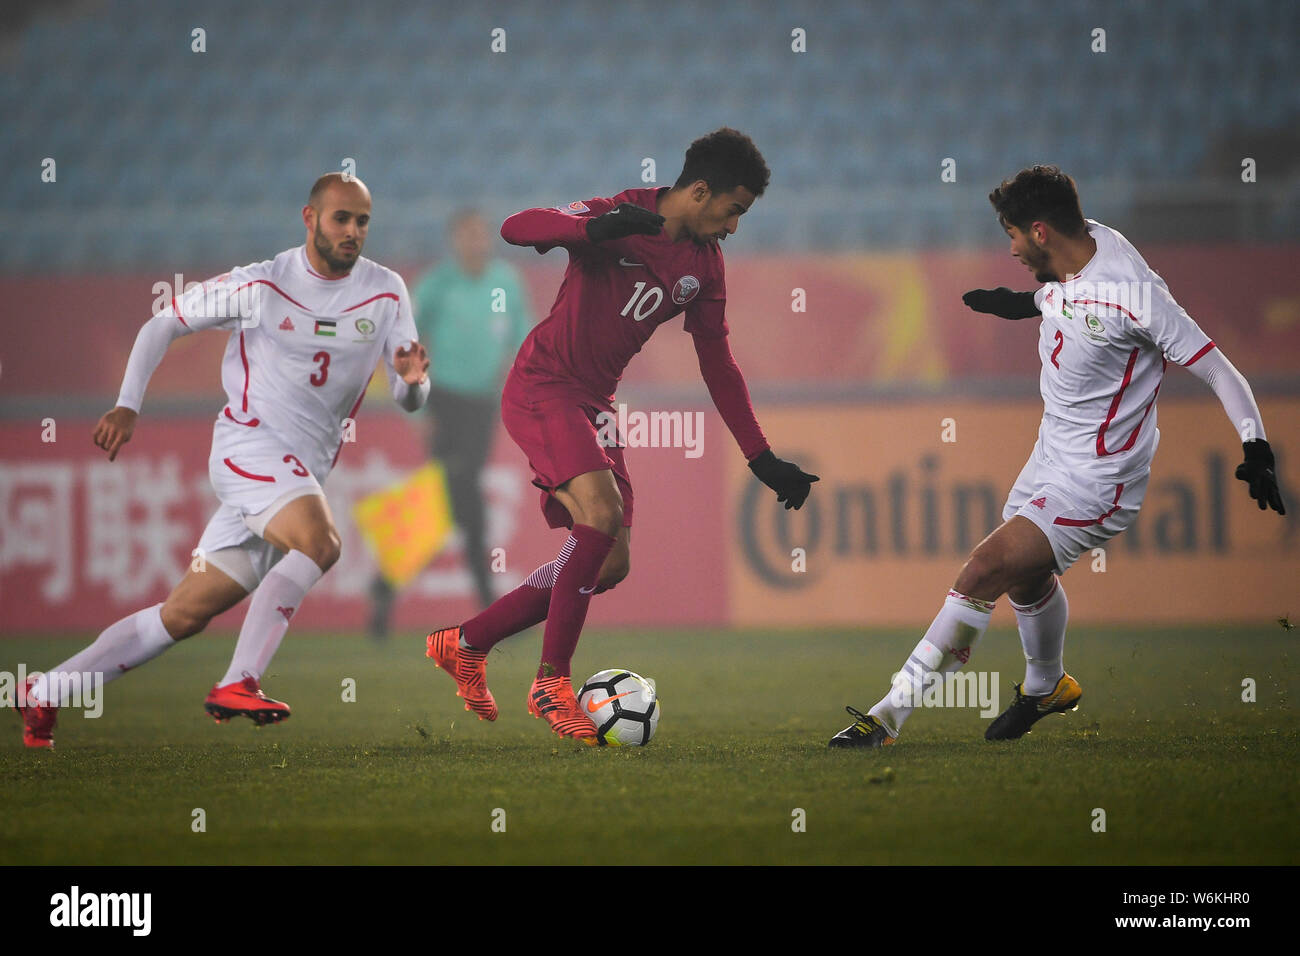 Akram Hassan Afif Yahya Afif of Qatar, center, dribbles against Palestine in the quarterfinal match during the 2018 AFC U-23 Championship in Jiangyin Stock Photo